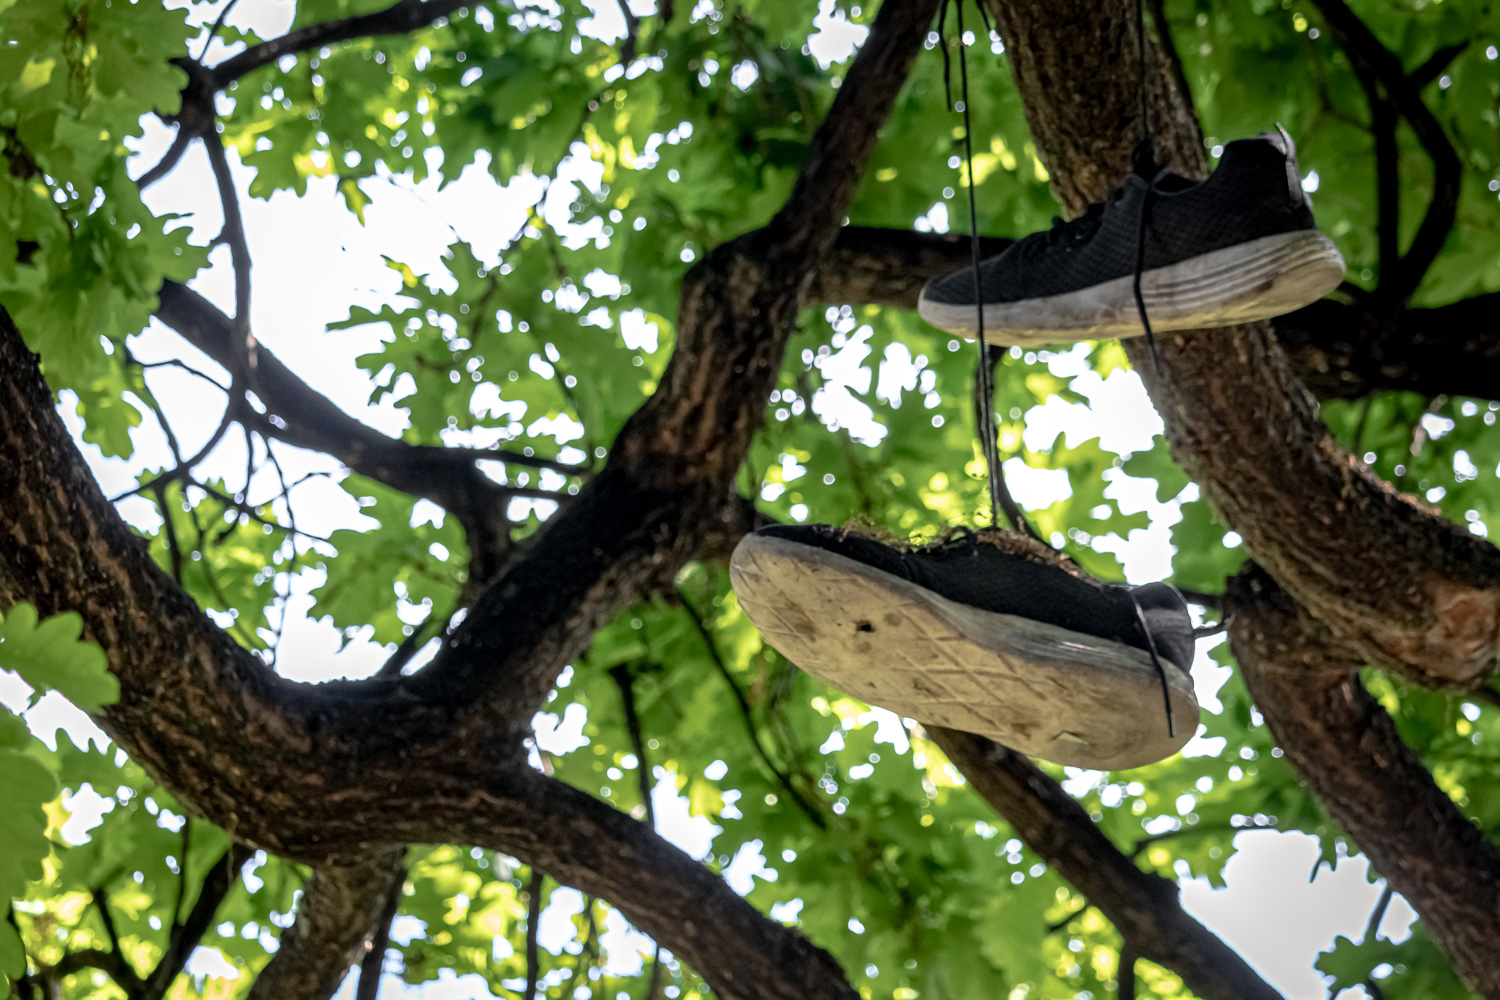 A pair of black and white running shoes hanging from an oak tree